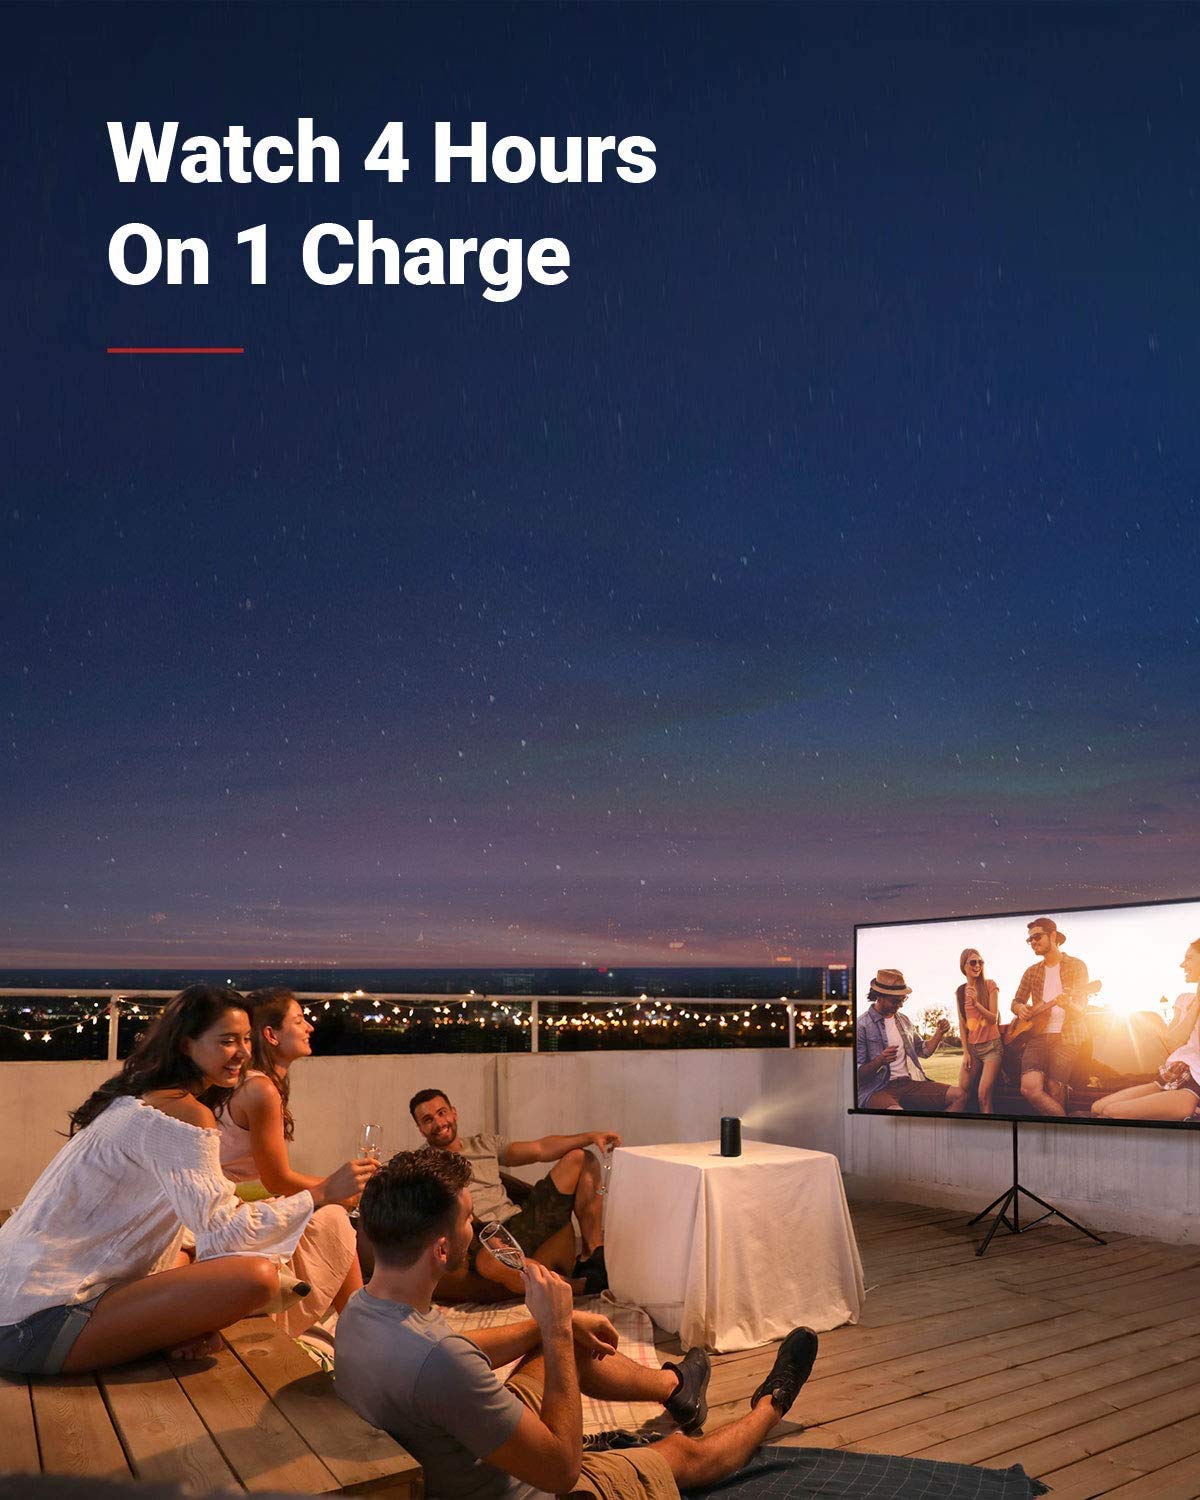 Anker NEBULA Capsule Max, Mini Projector with WiFi and Bluetooth, Small Projector, 200 ANSI Lumen, Projector Portable, Native 720p HD, 8W Speaker, 100 Inch Picture, 4Hr Video Playtime, Home Theater